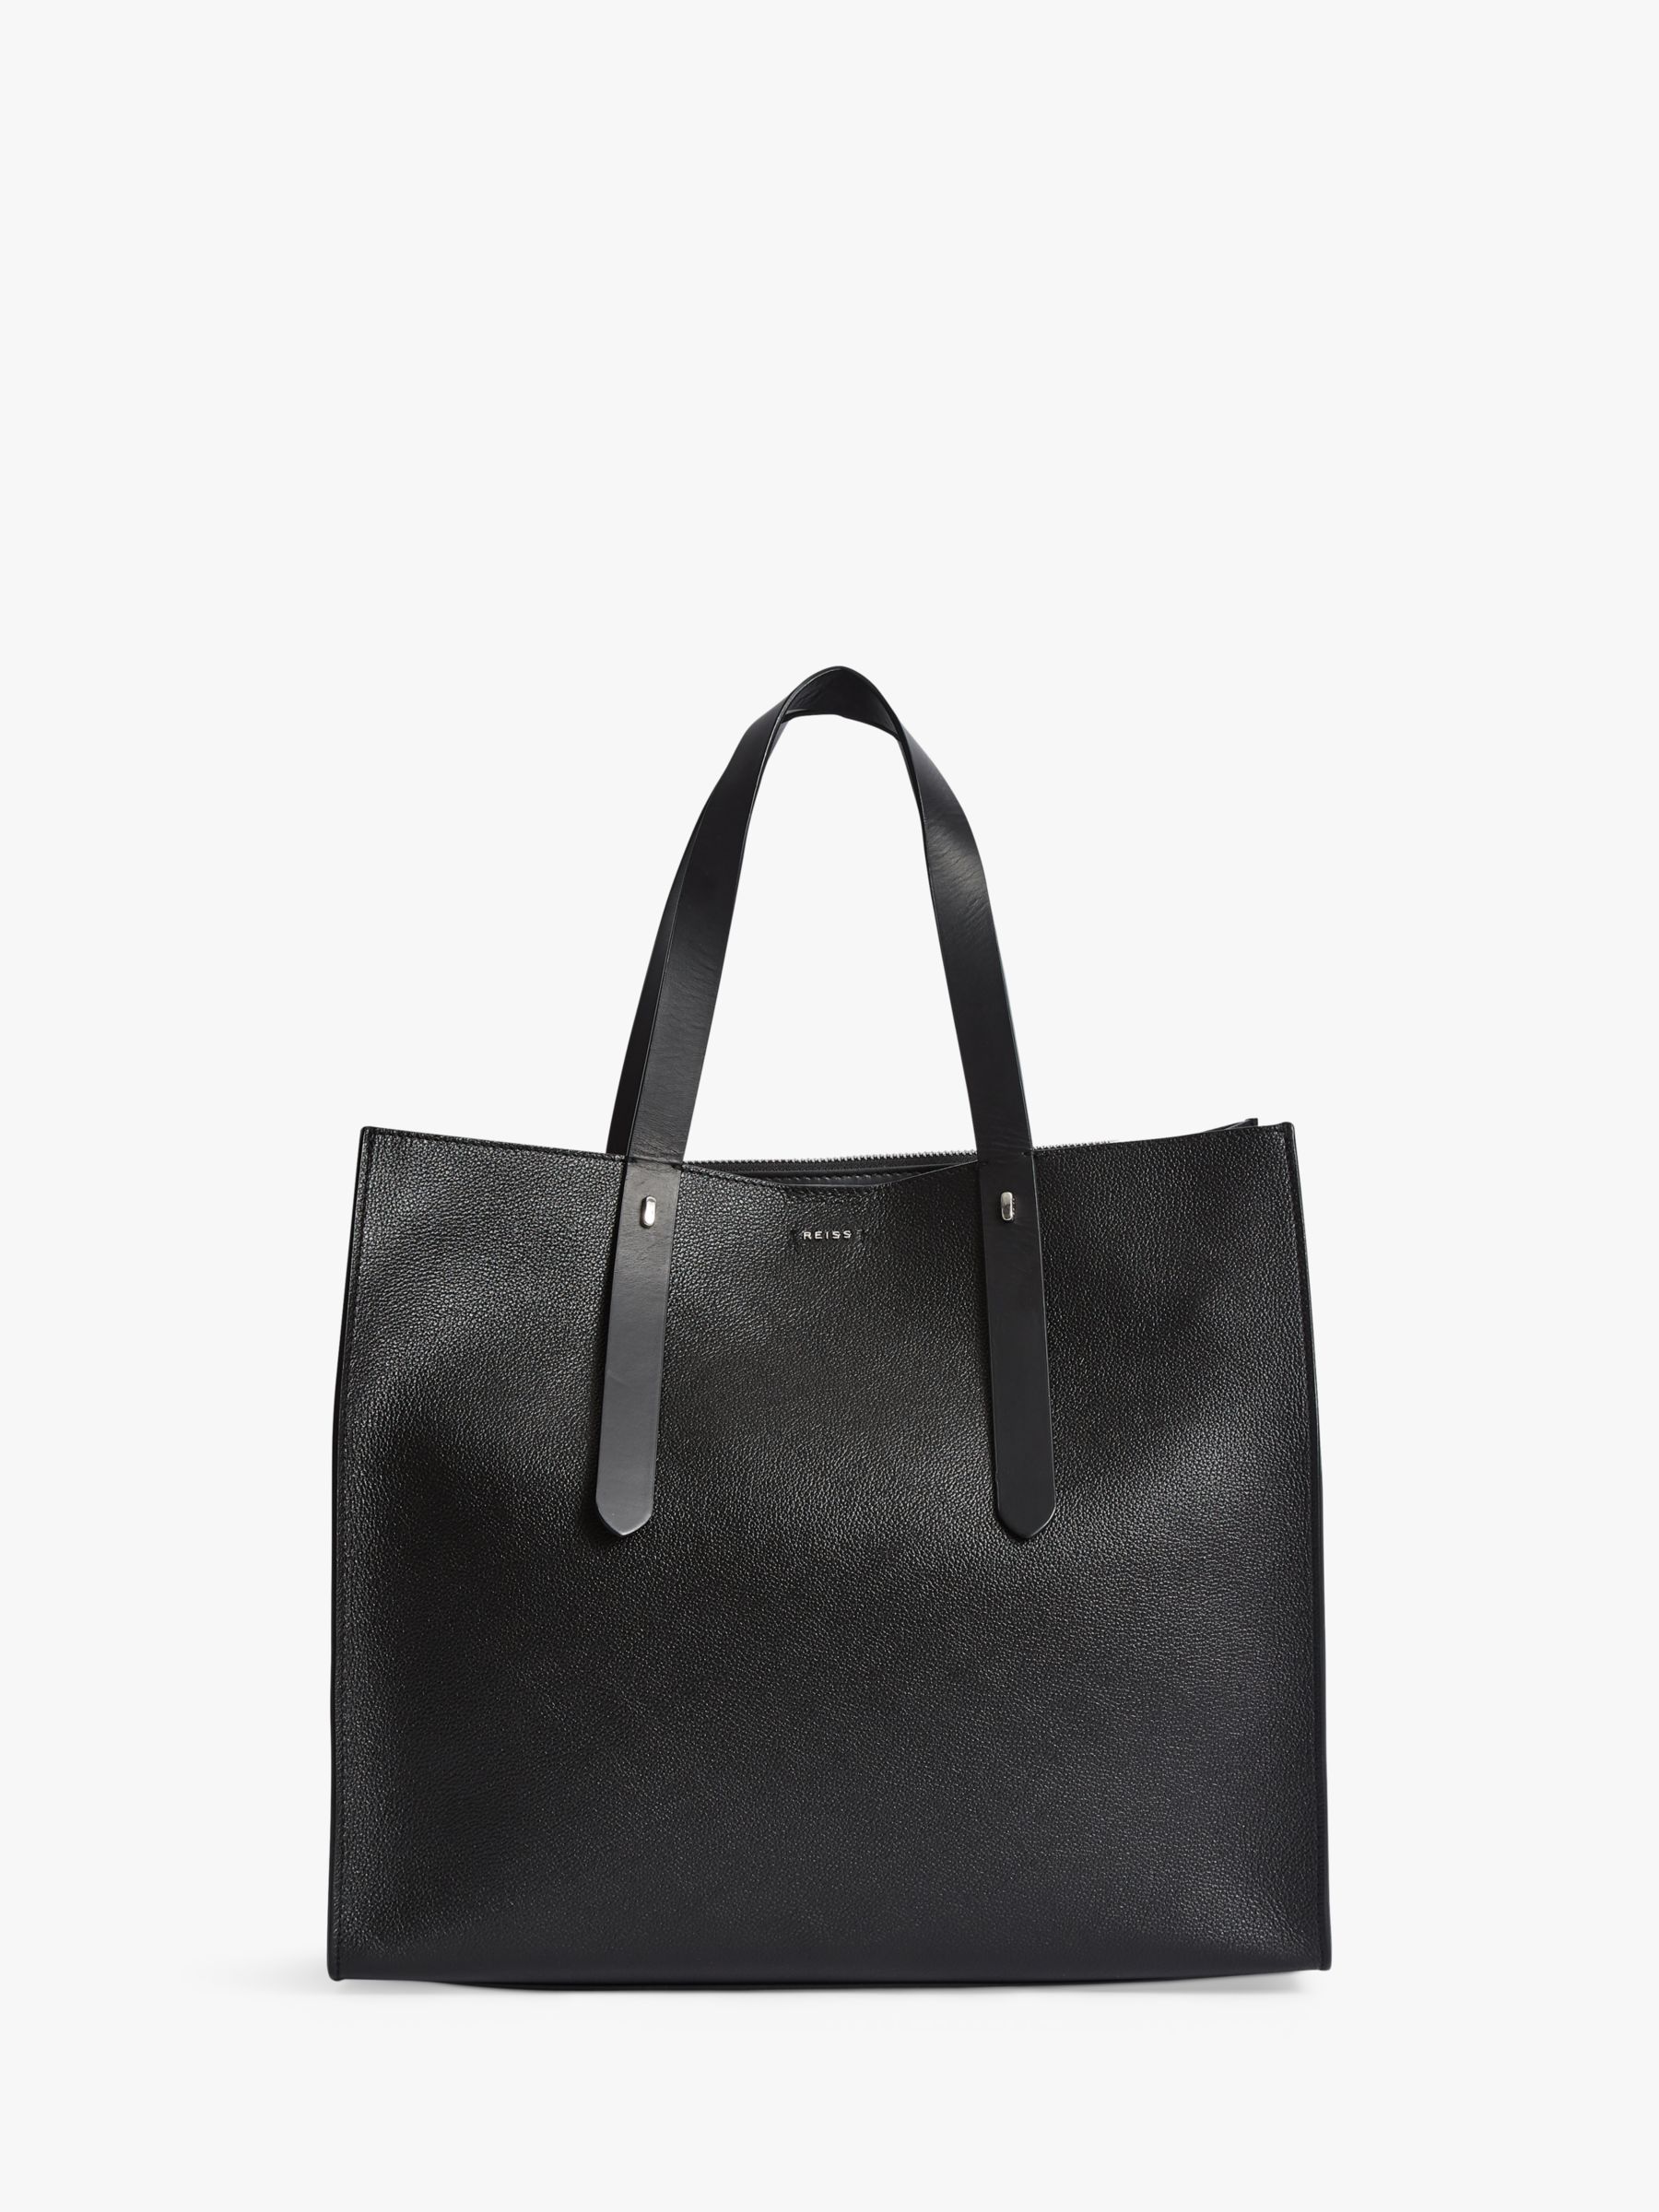 Reiss Swaby Leather Tote Bag, Black at John Lewis & Partners